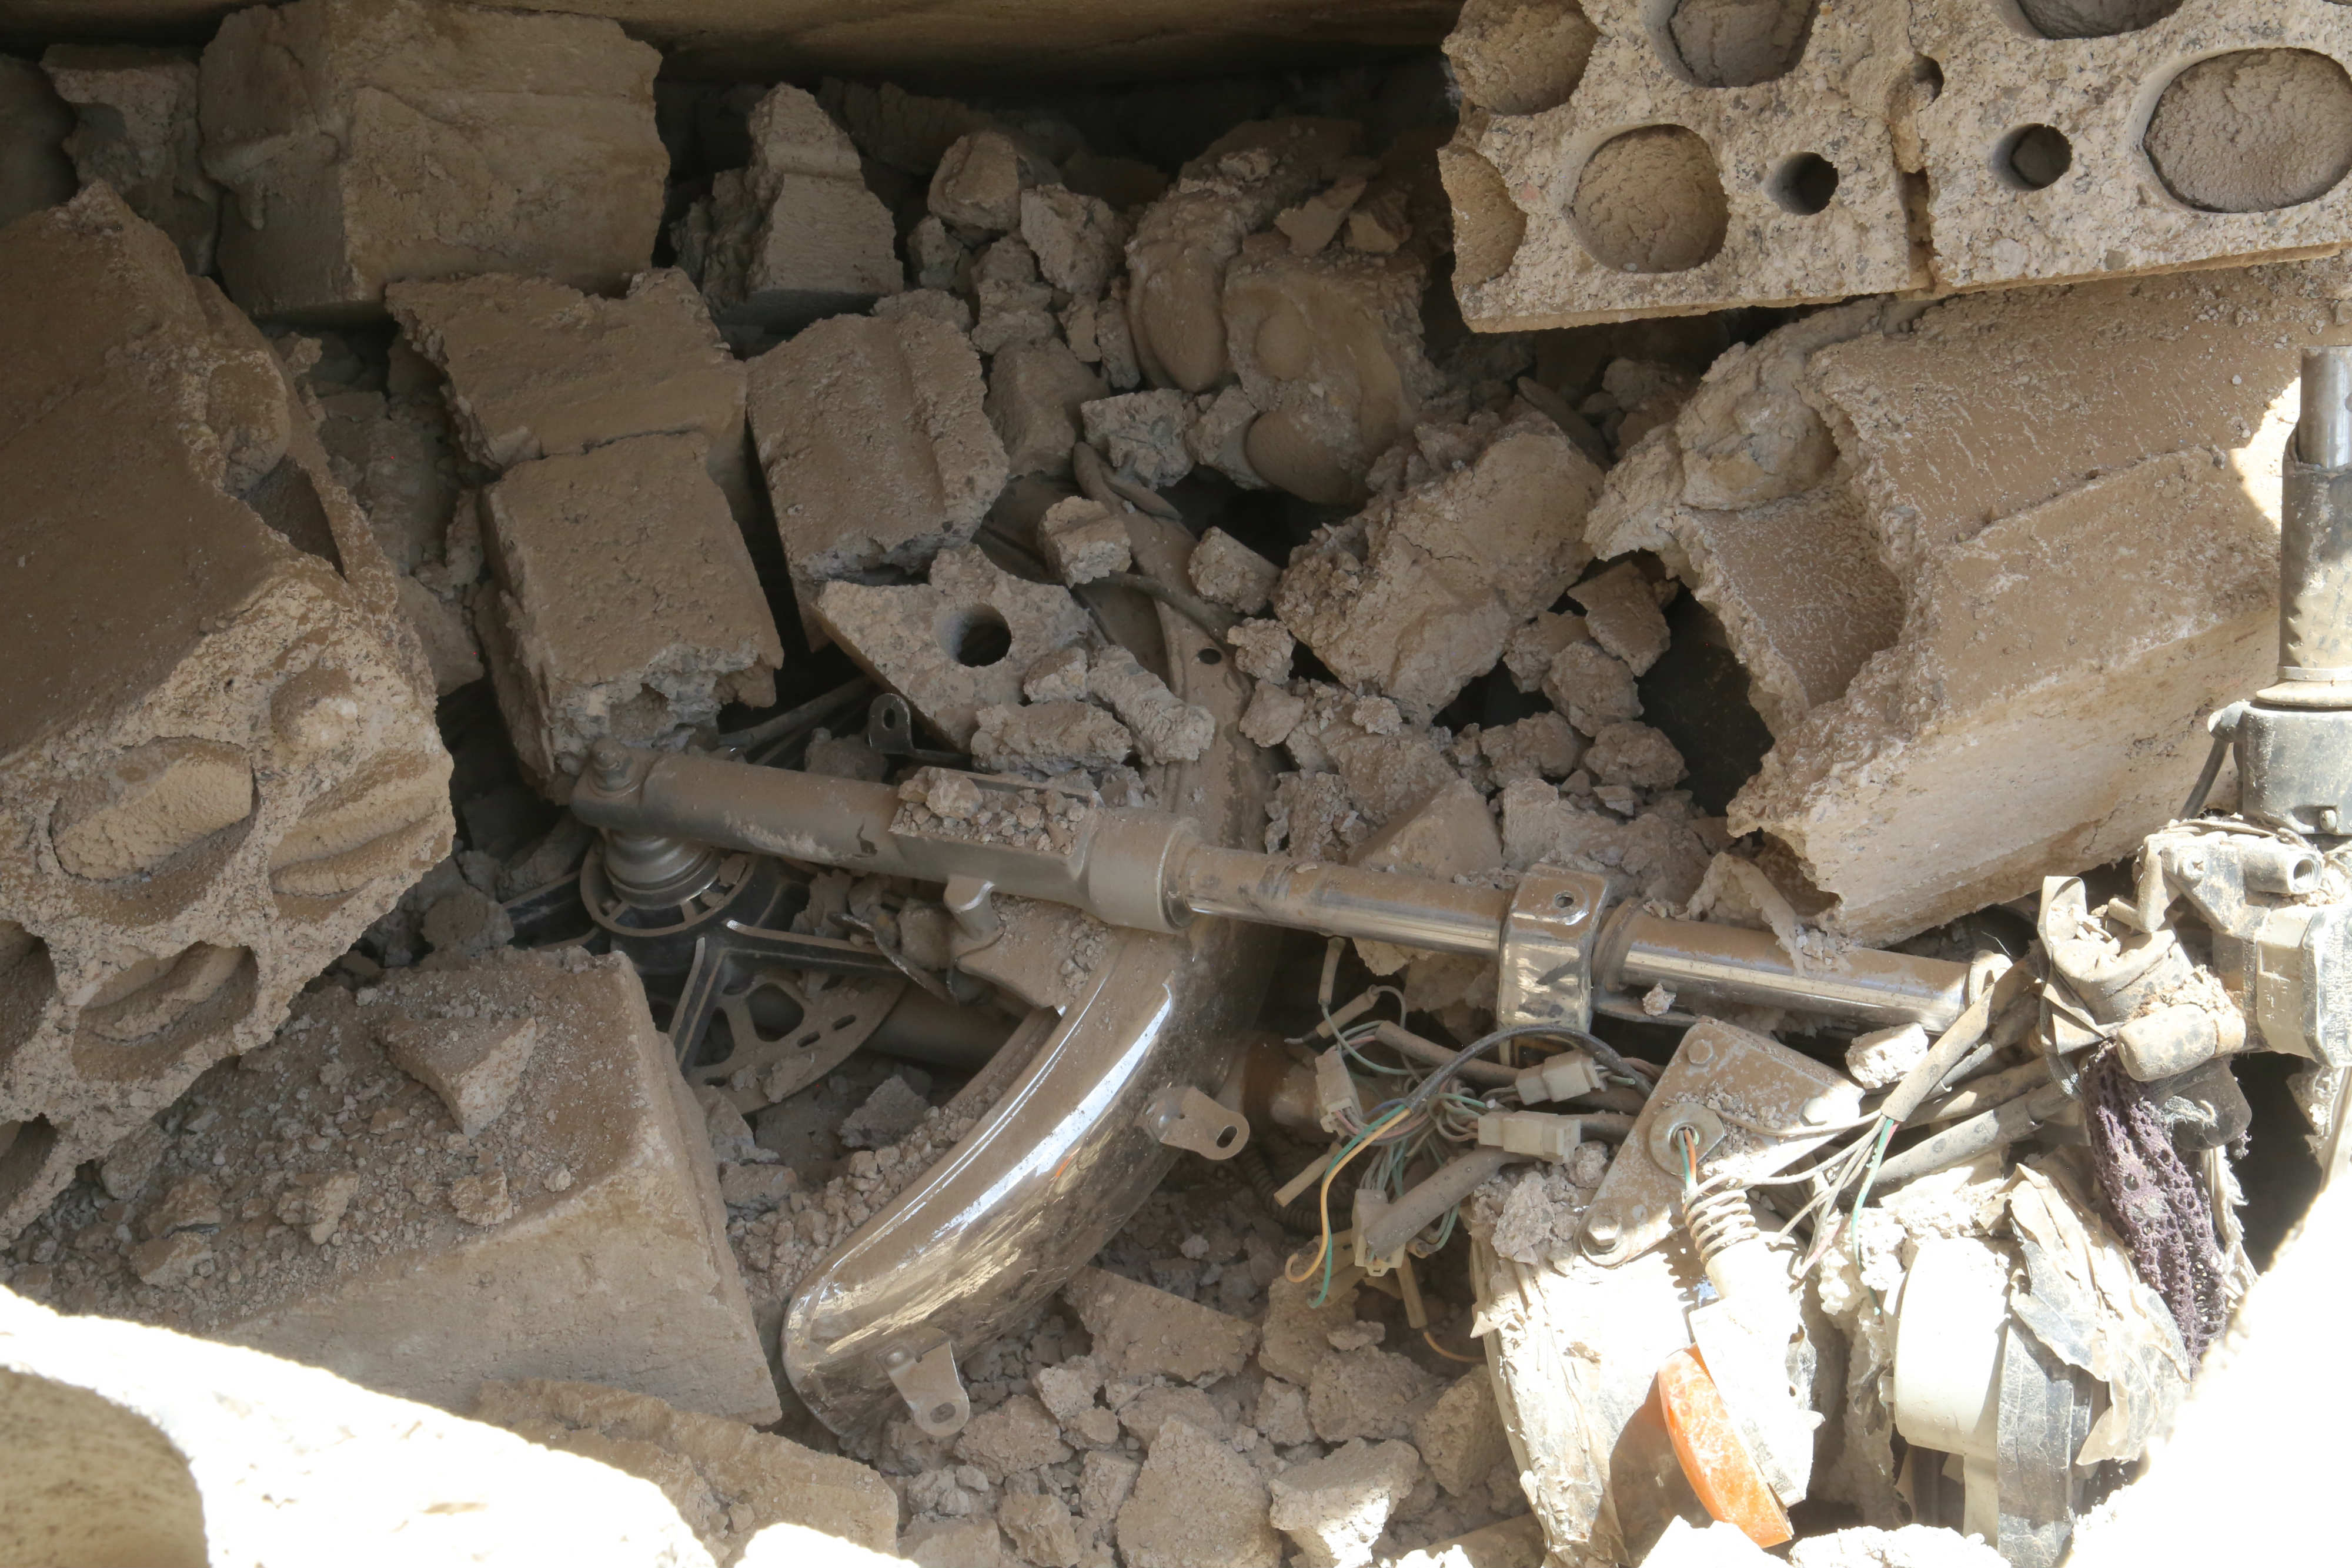 A child's bicycle is seen among the rubble following the bombings in Saawan (MEE)